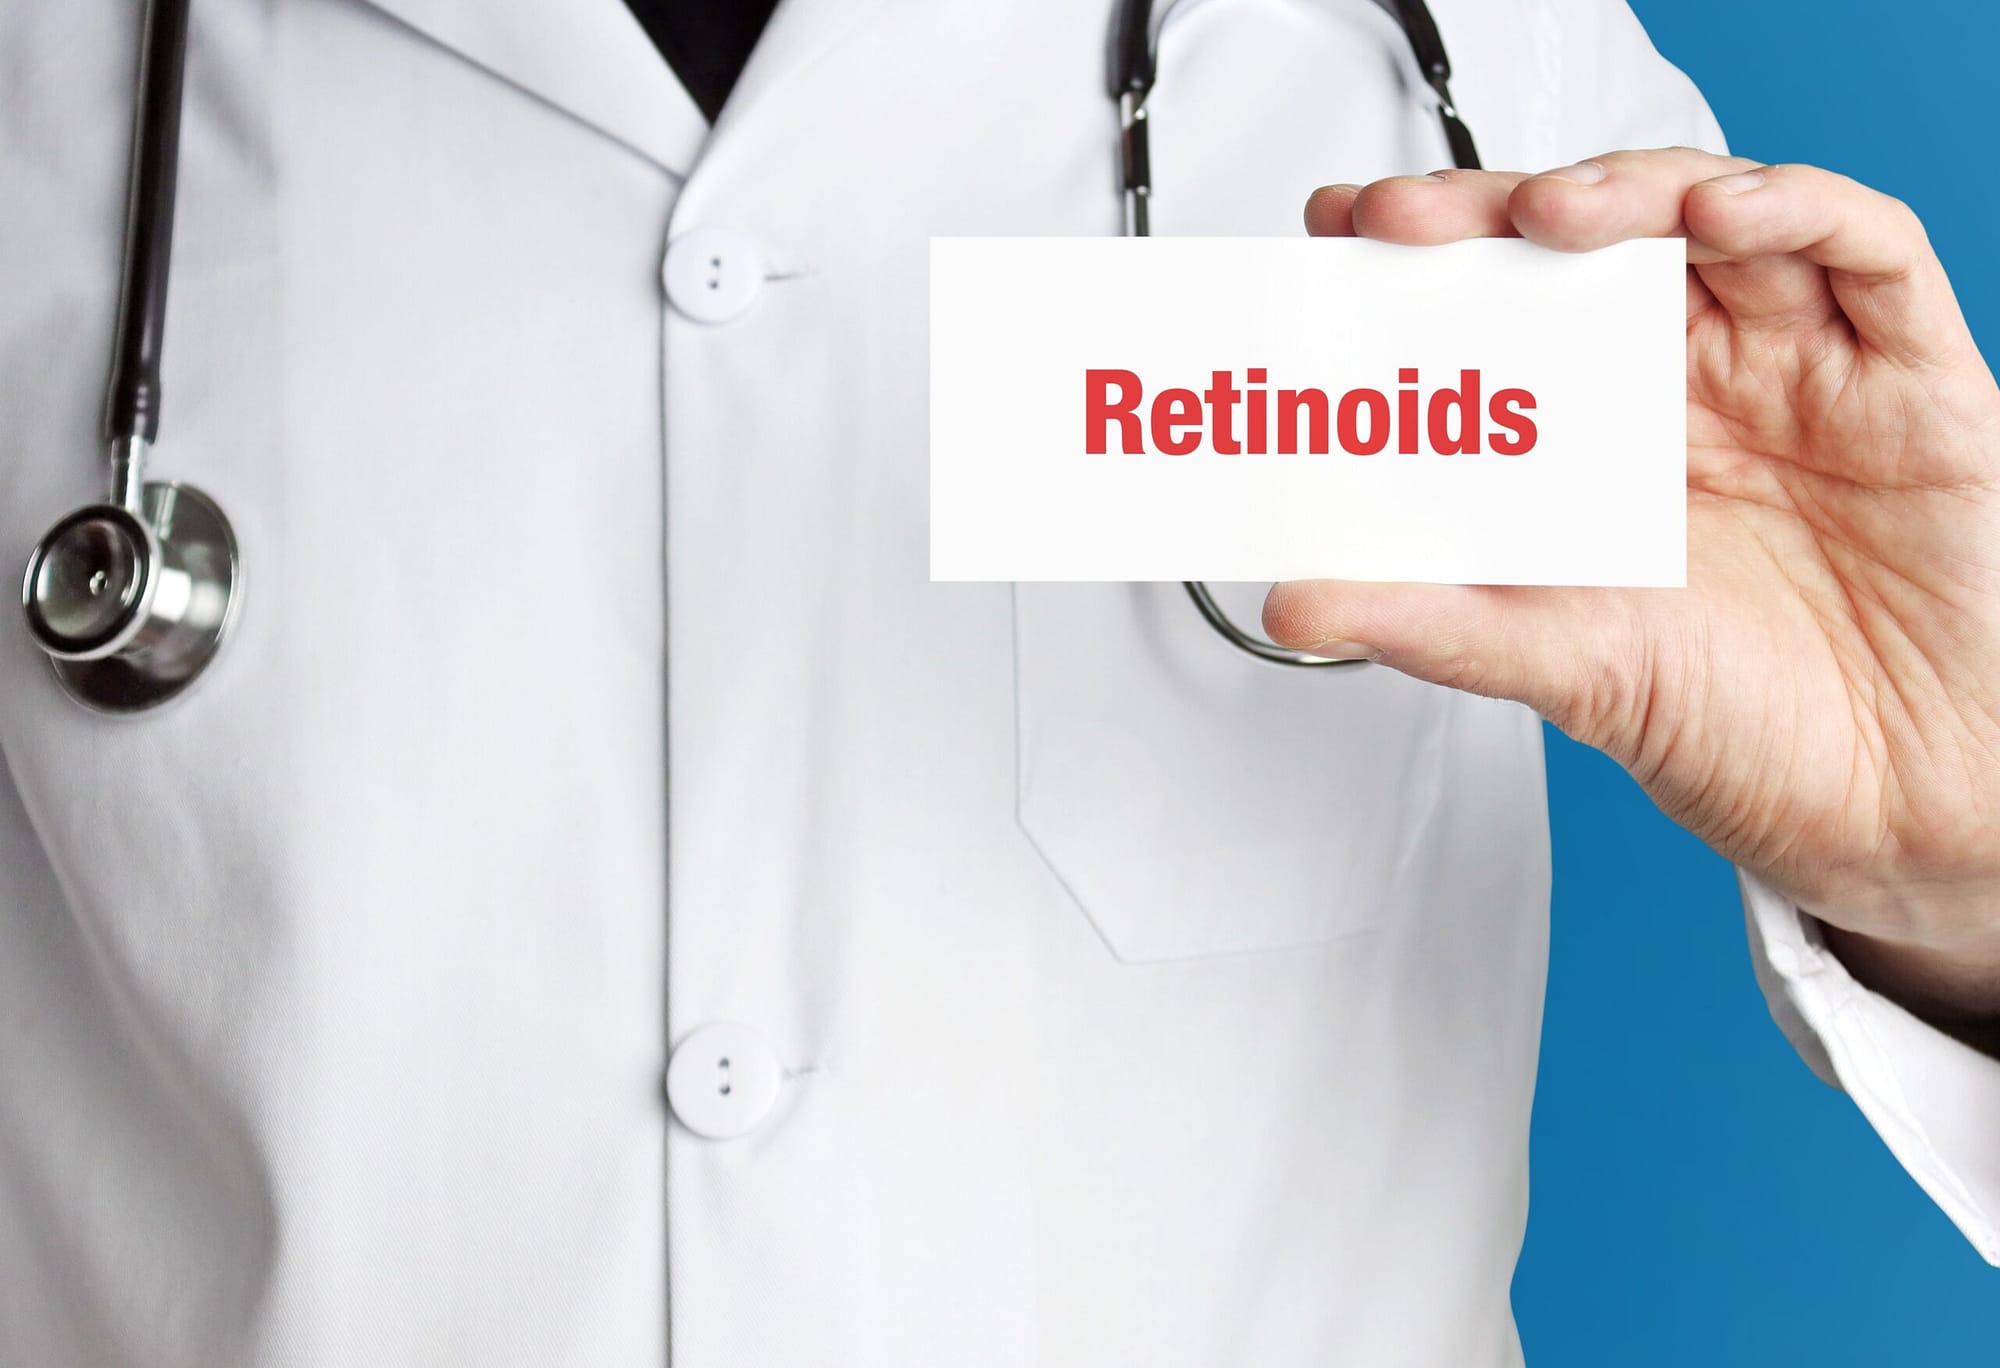 Retinoids. Doctor in smock holds up business card. The term Reti